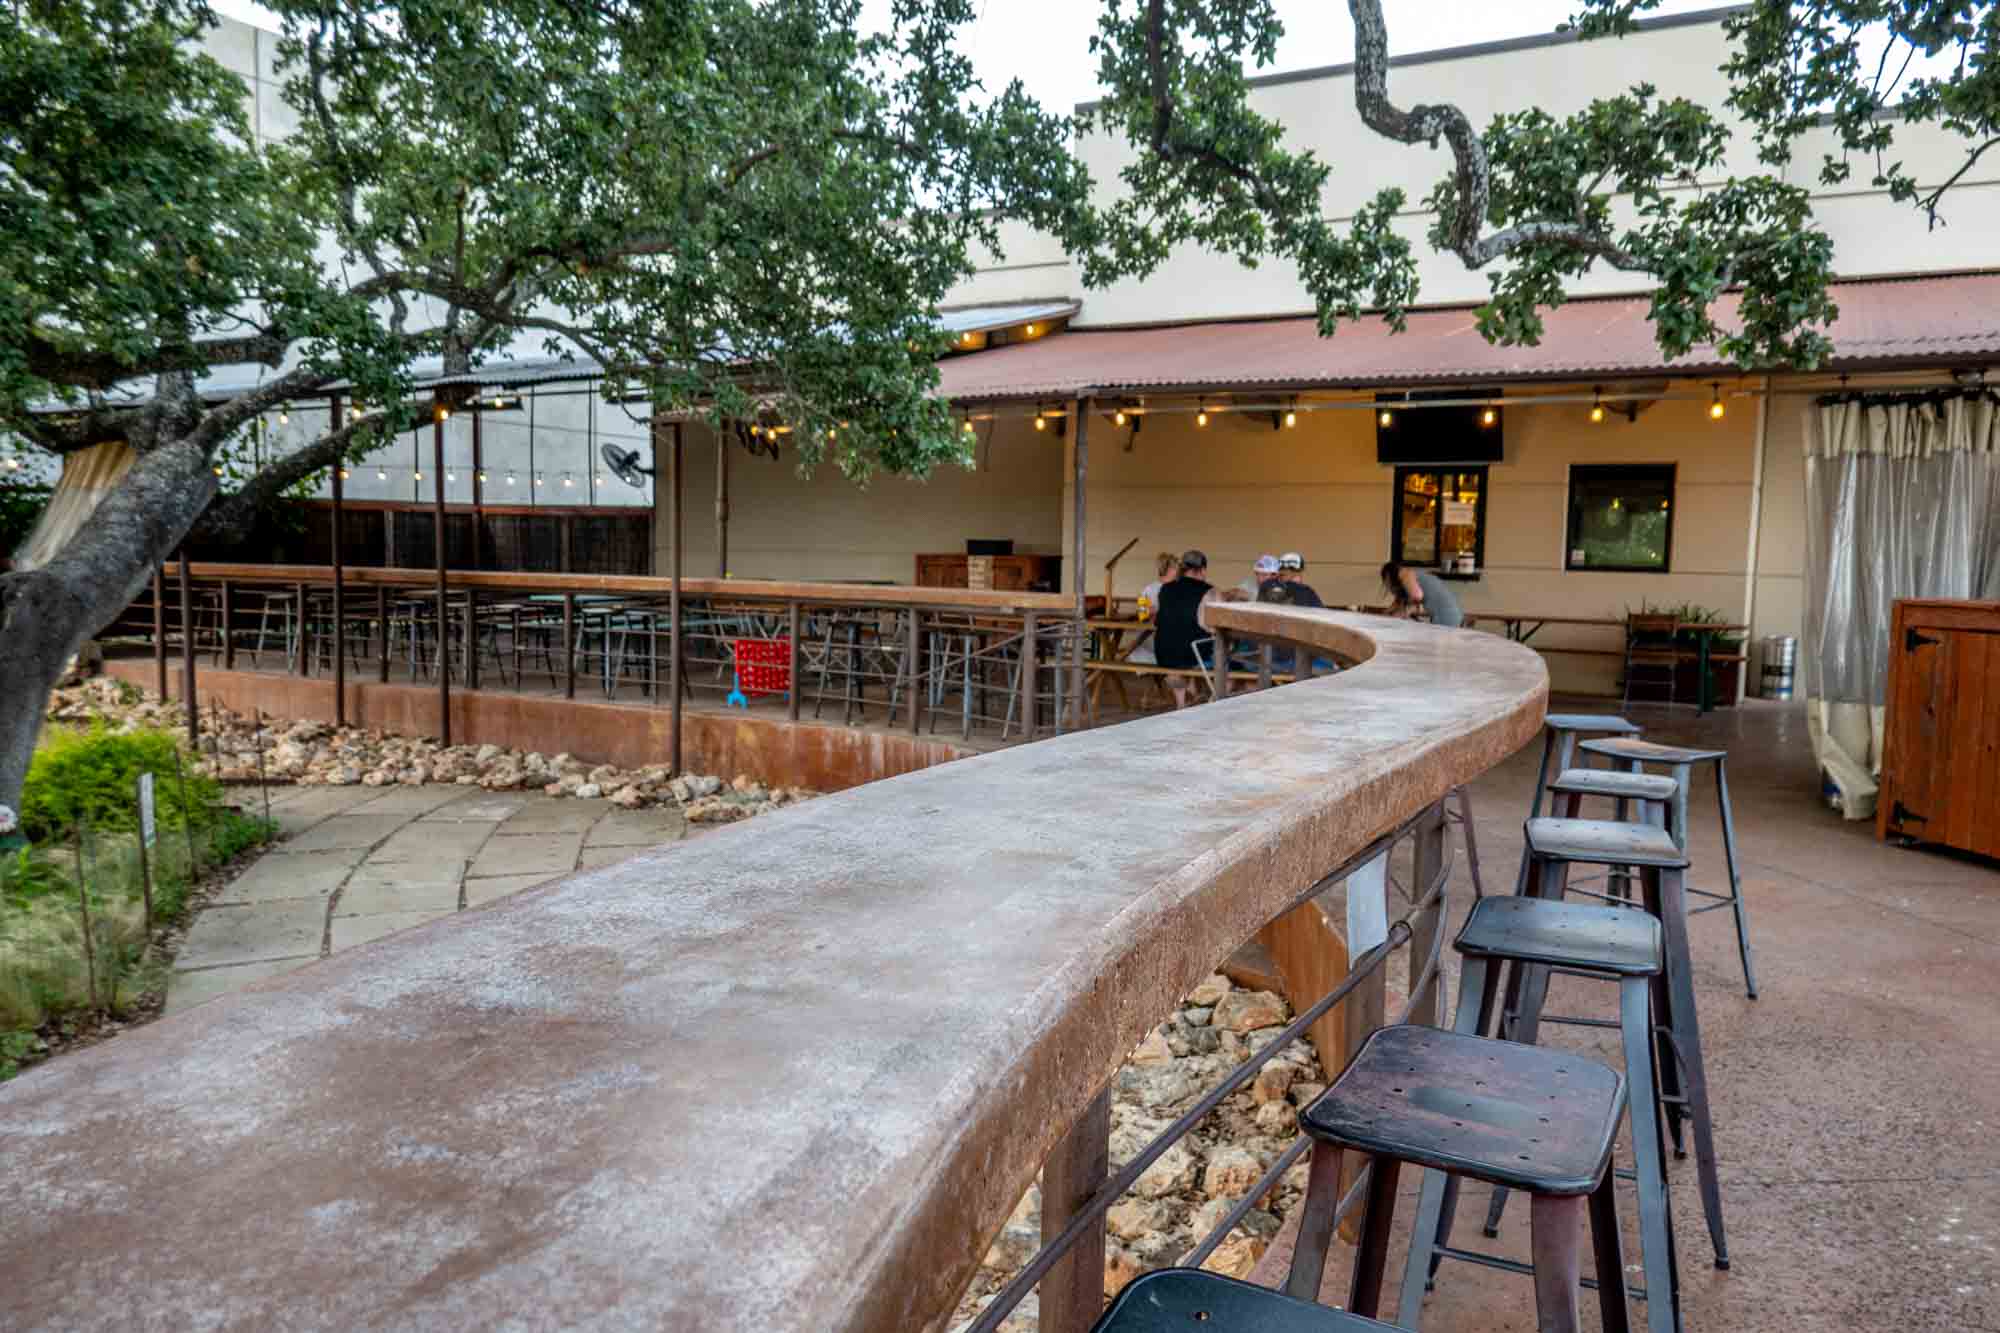 Tree and benches in an outdoor beer garden